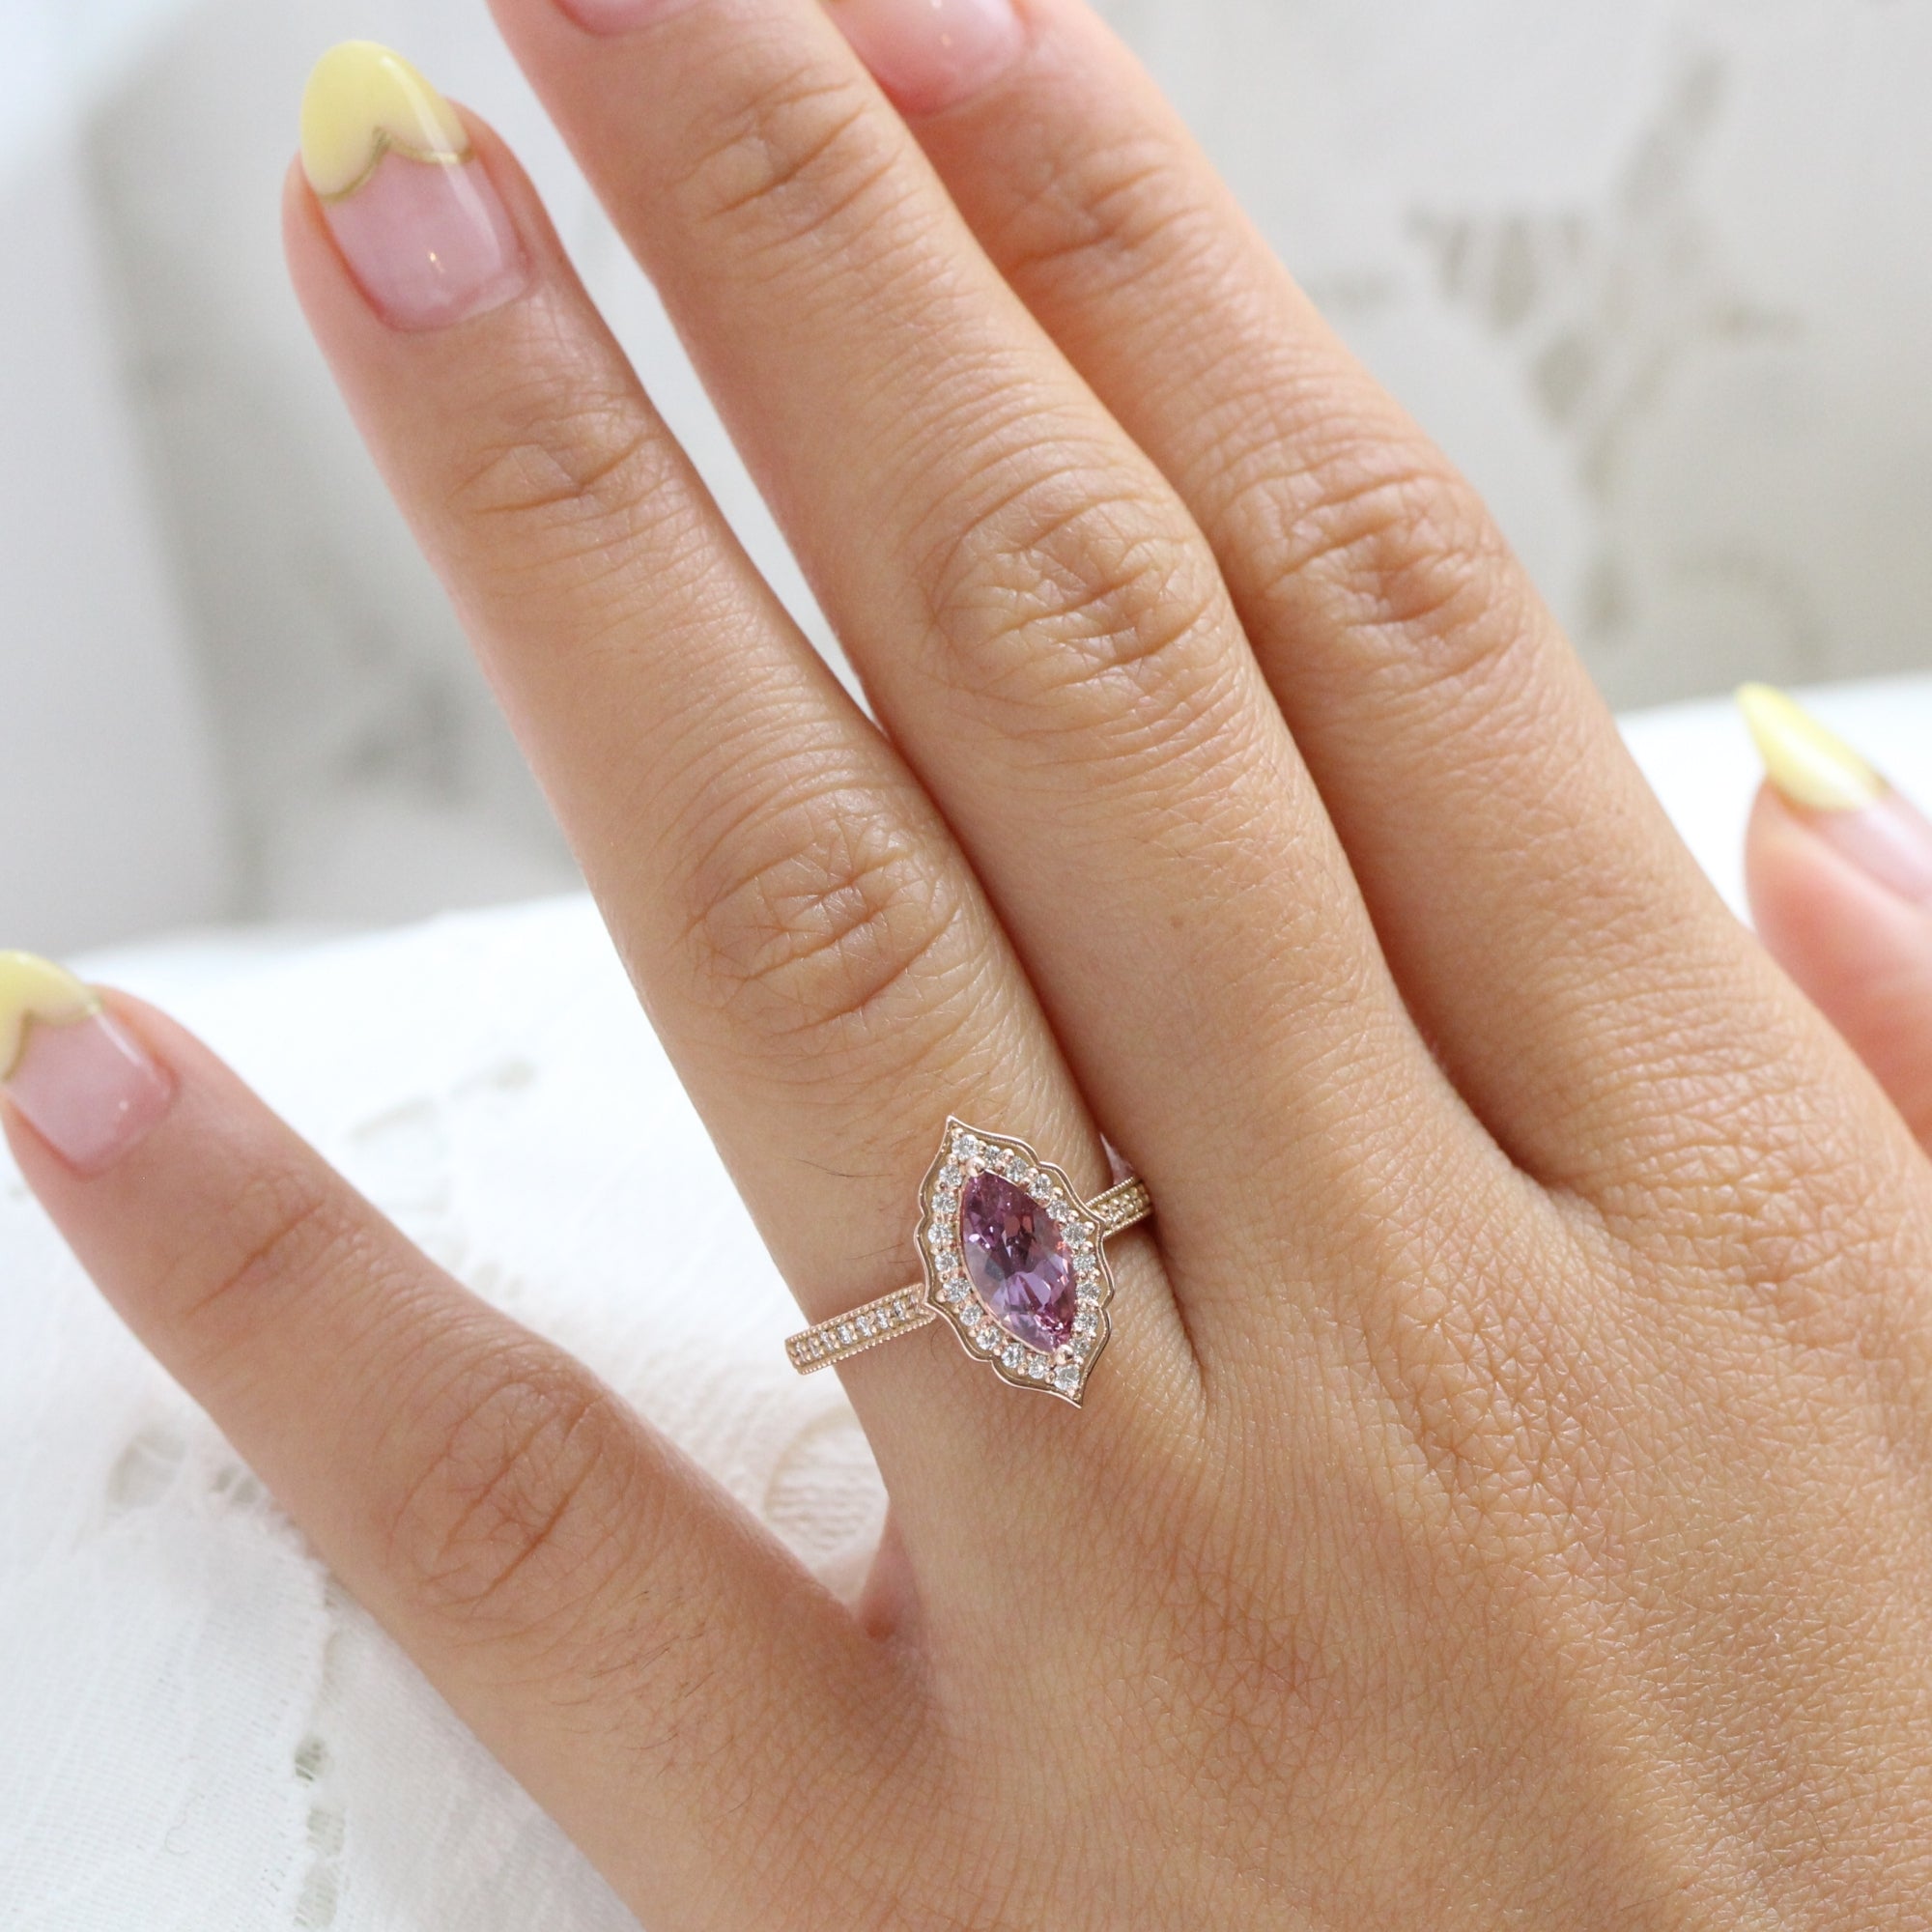 Pink Sapphire Rings - Jewelry Designs